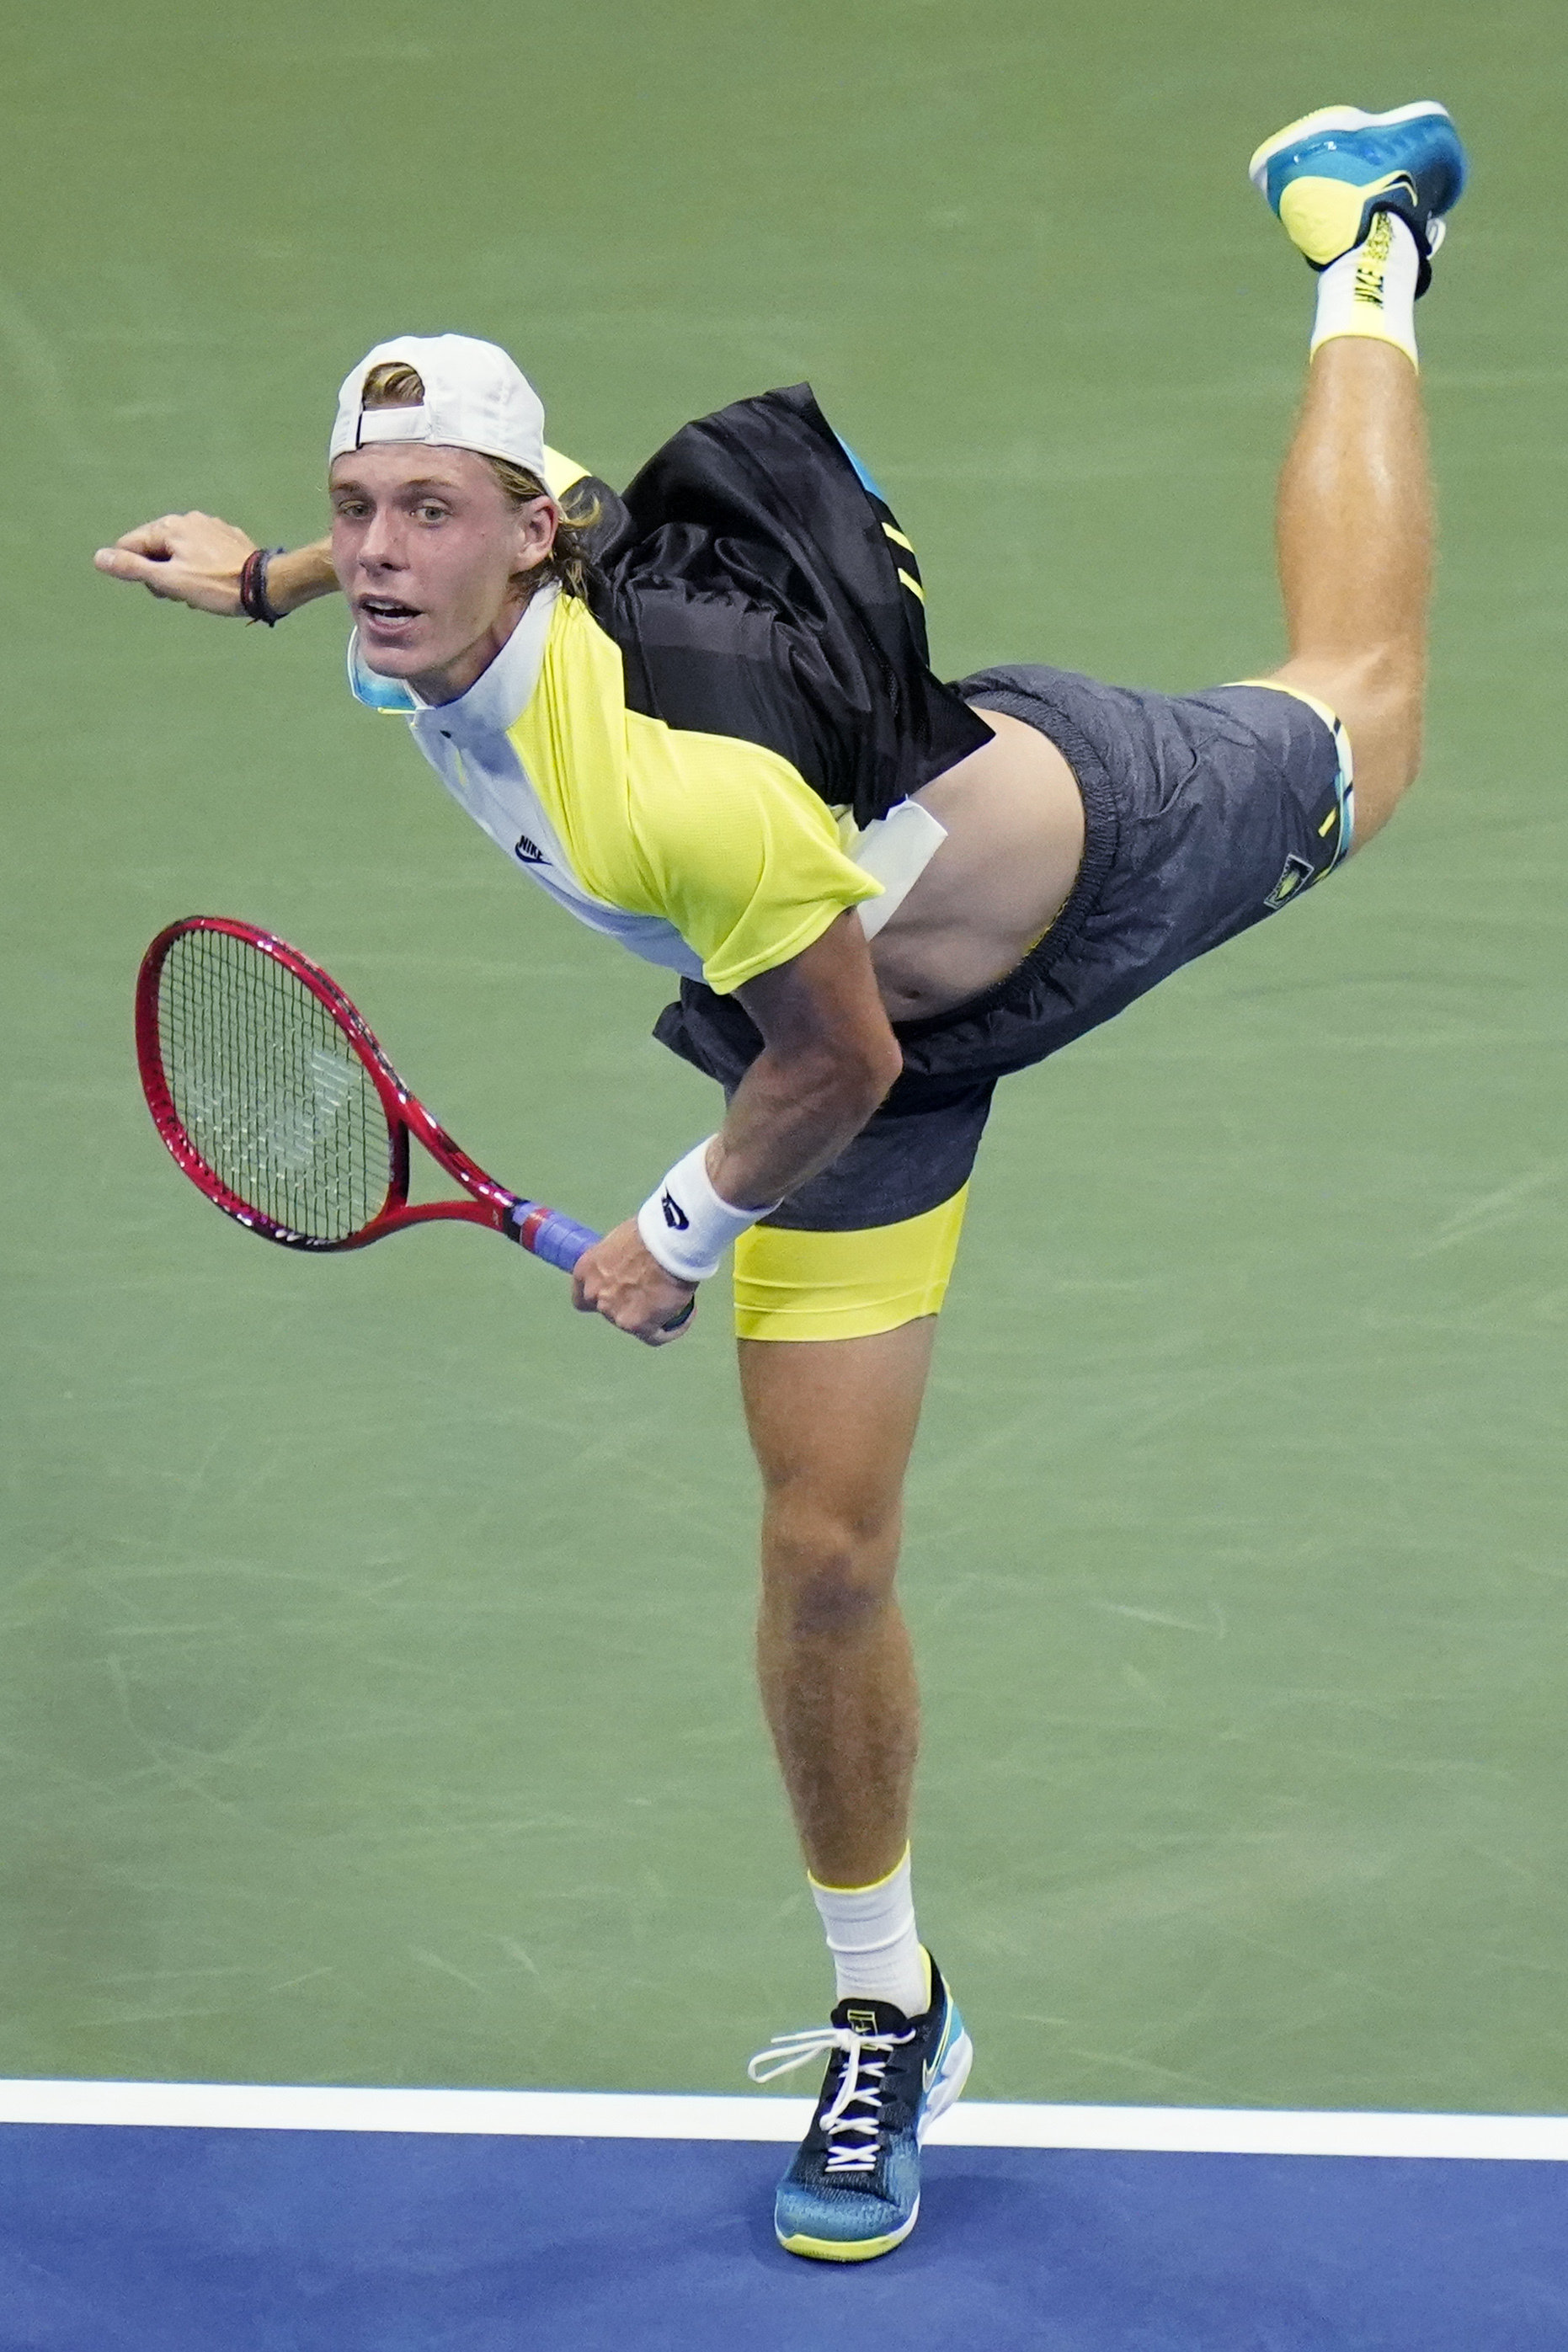 Denis Shapovalov, of Canada, serves to Pablo Carreno Busta, of Spain, during the quarterfinal round of the US Open tennis championships, Tuesday, Sept. 8, 2020, in New York. (AP Photo/Frank Franklin II)